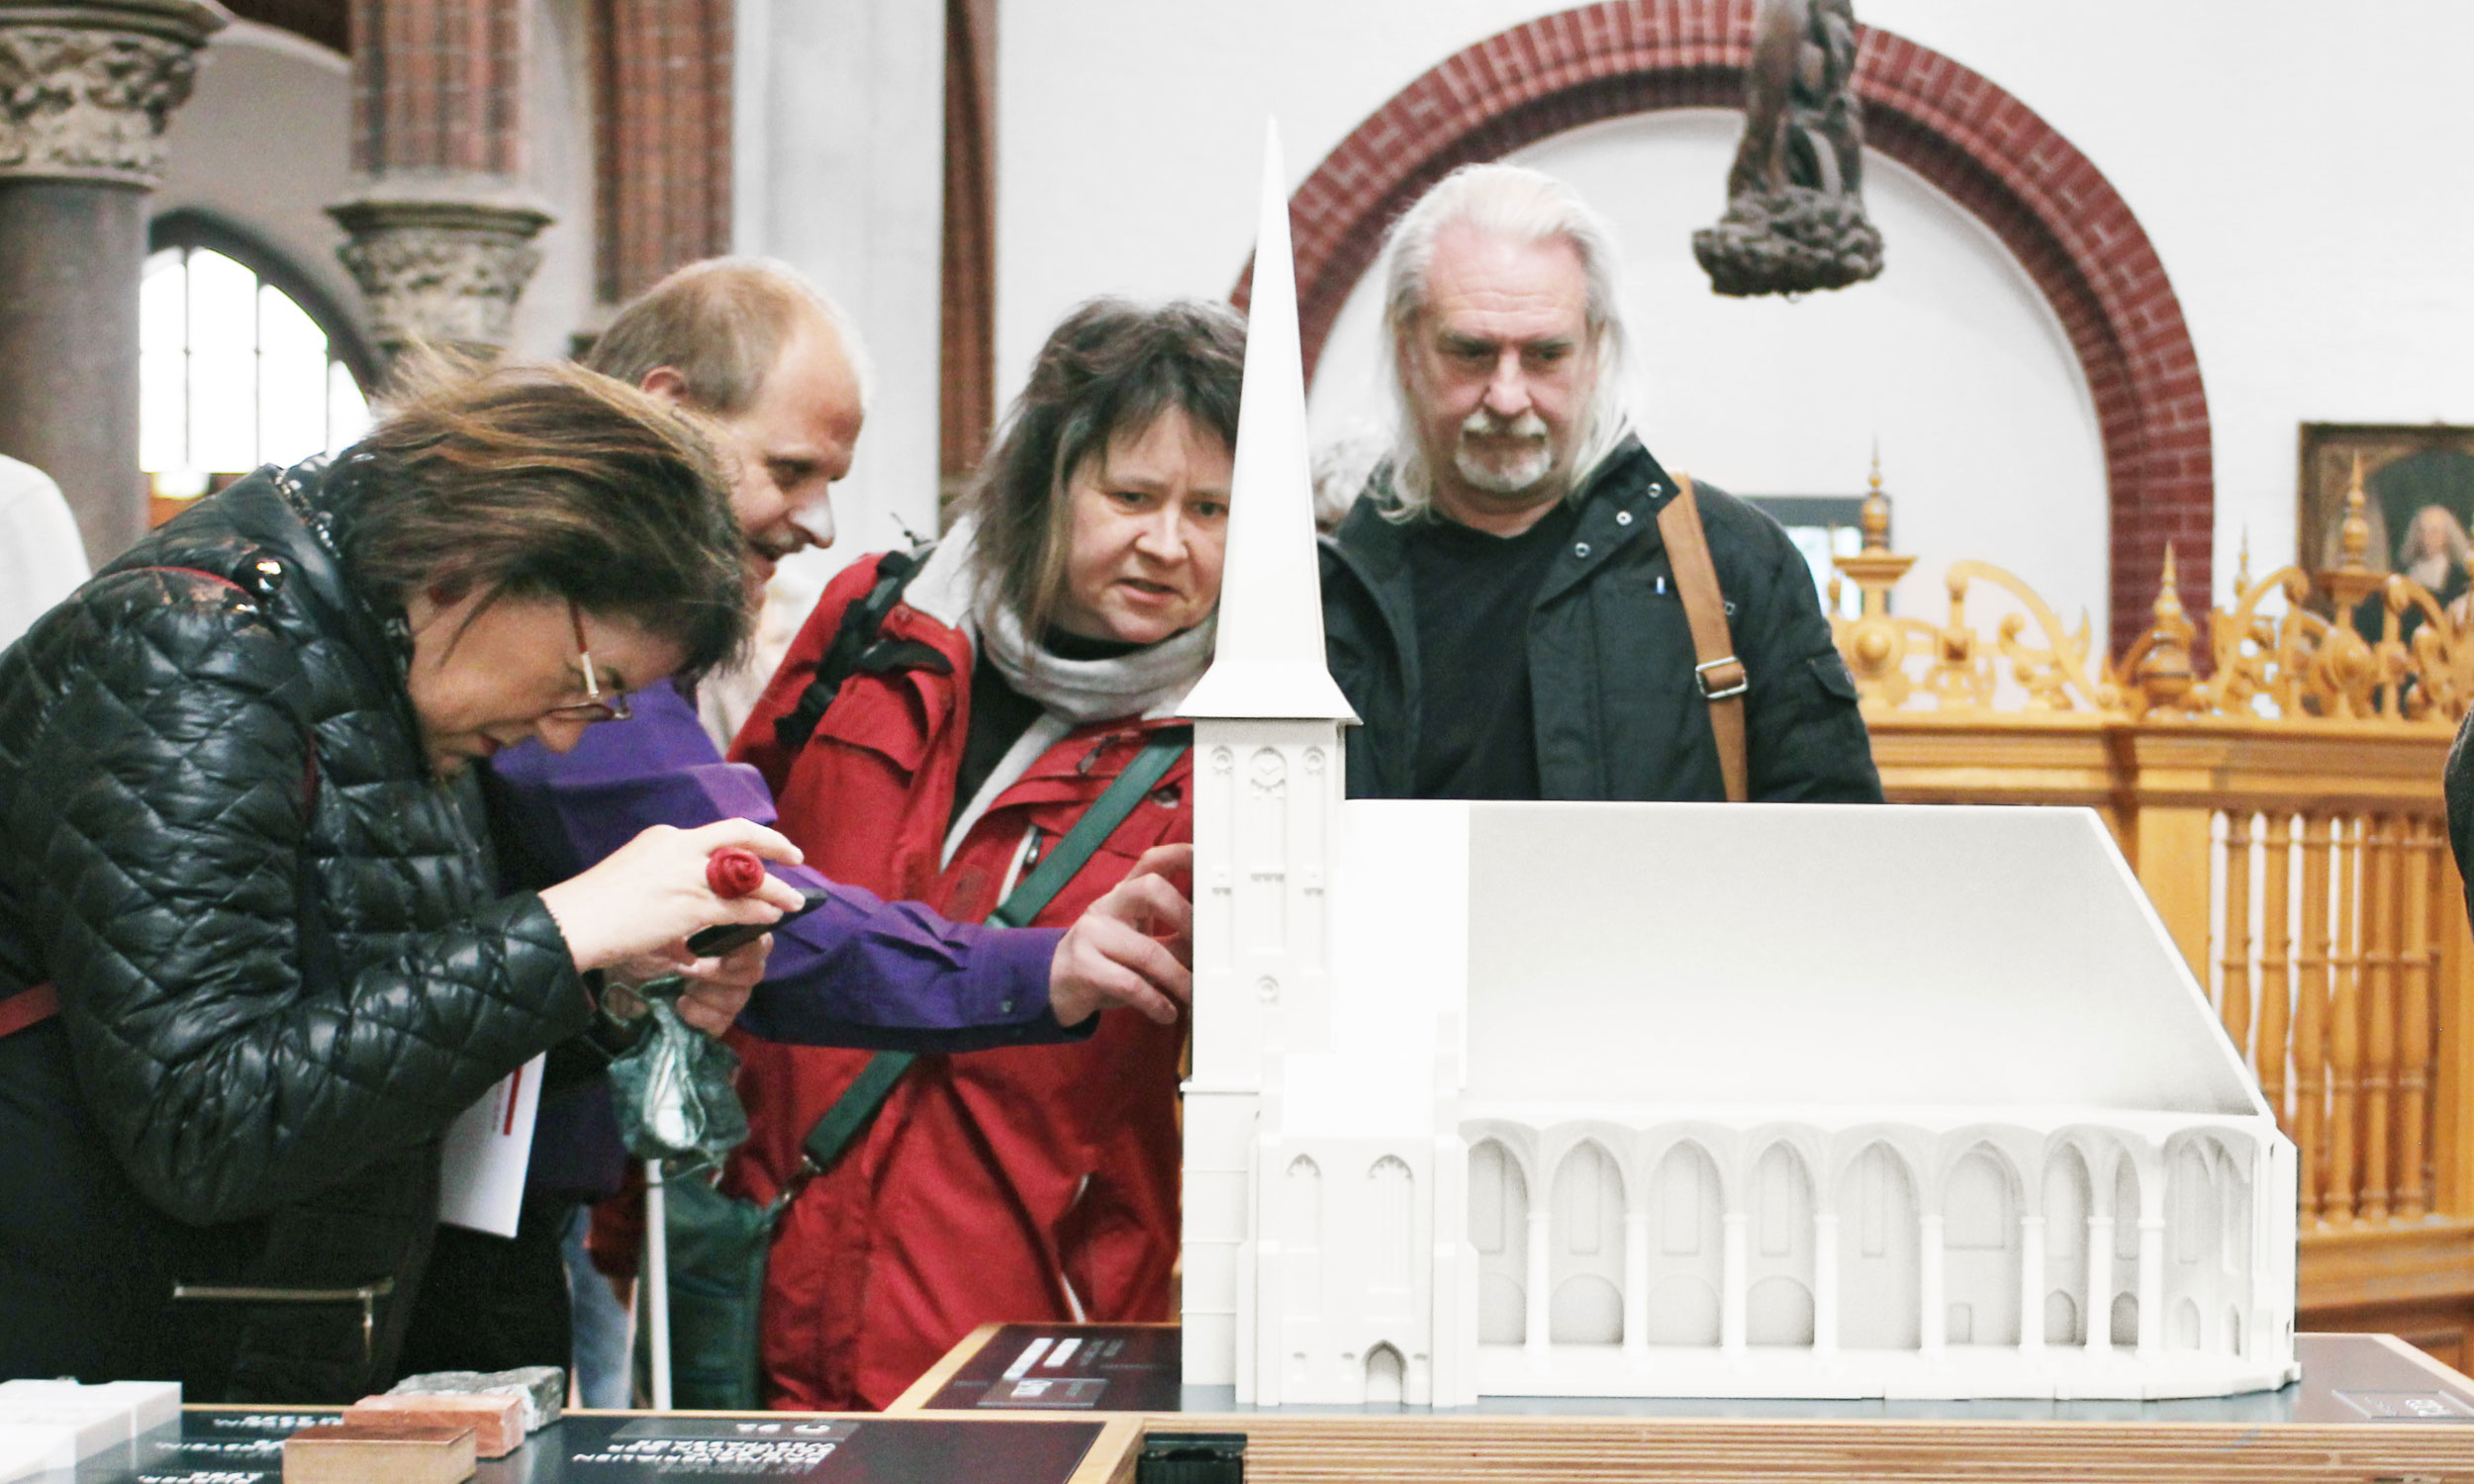 Sighted and blind visitors will explore the large model of the Nikolai Church at the opening.